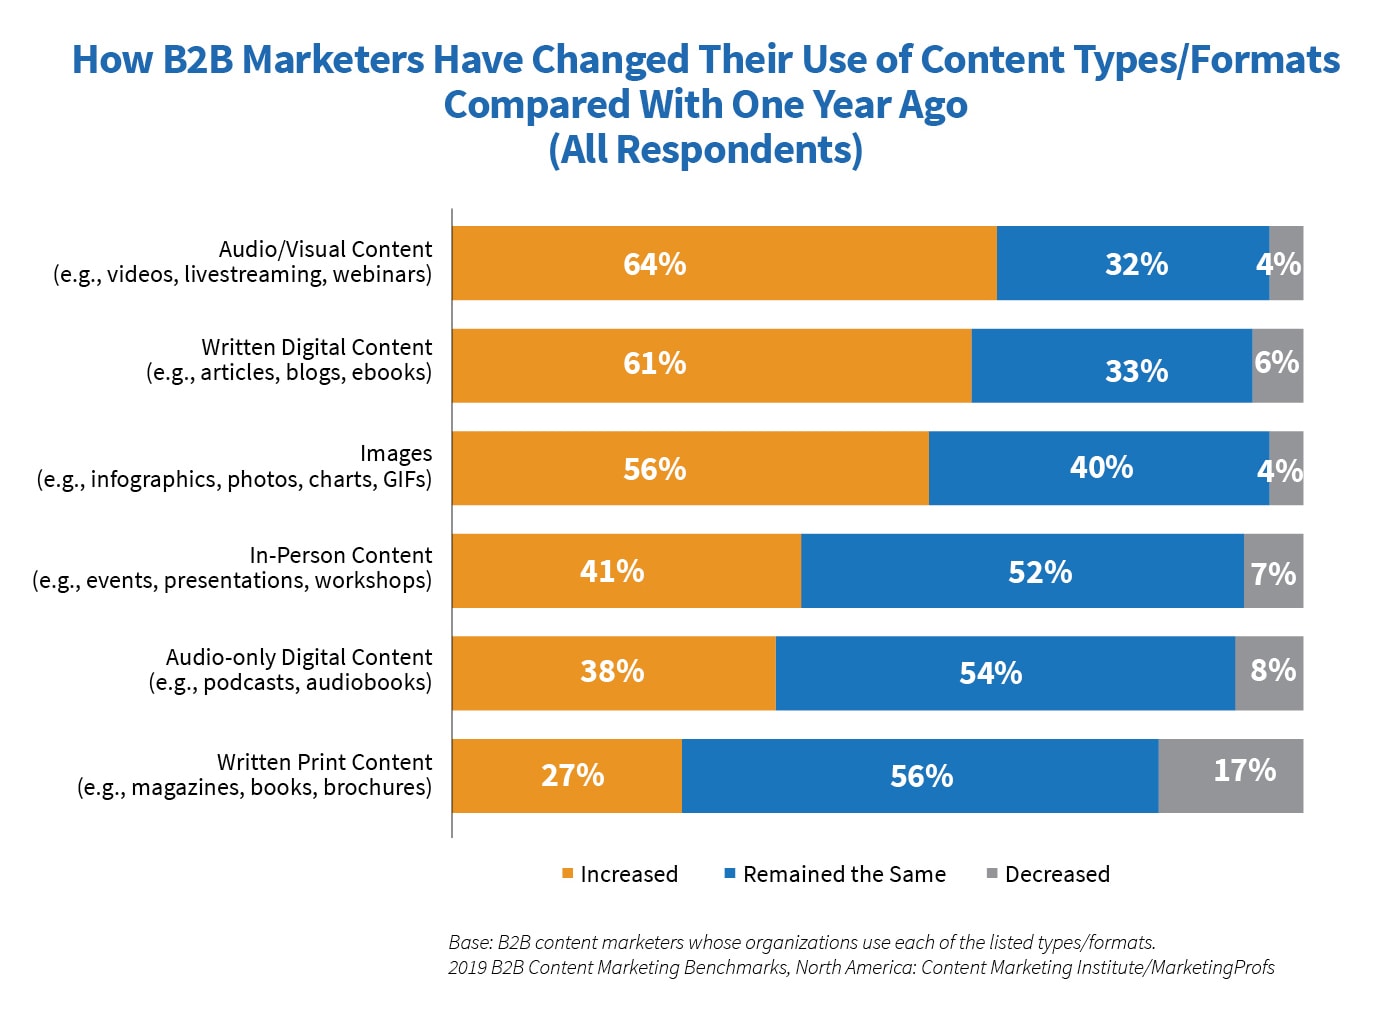 90% of Top Content Marketers Aim to be Useful, Not Promotional [STUDY]